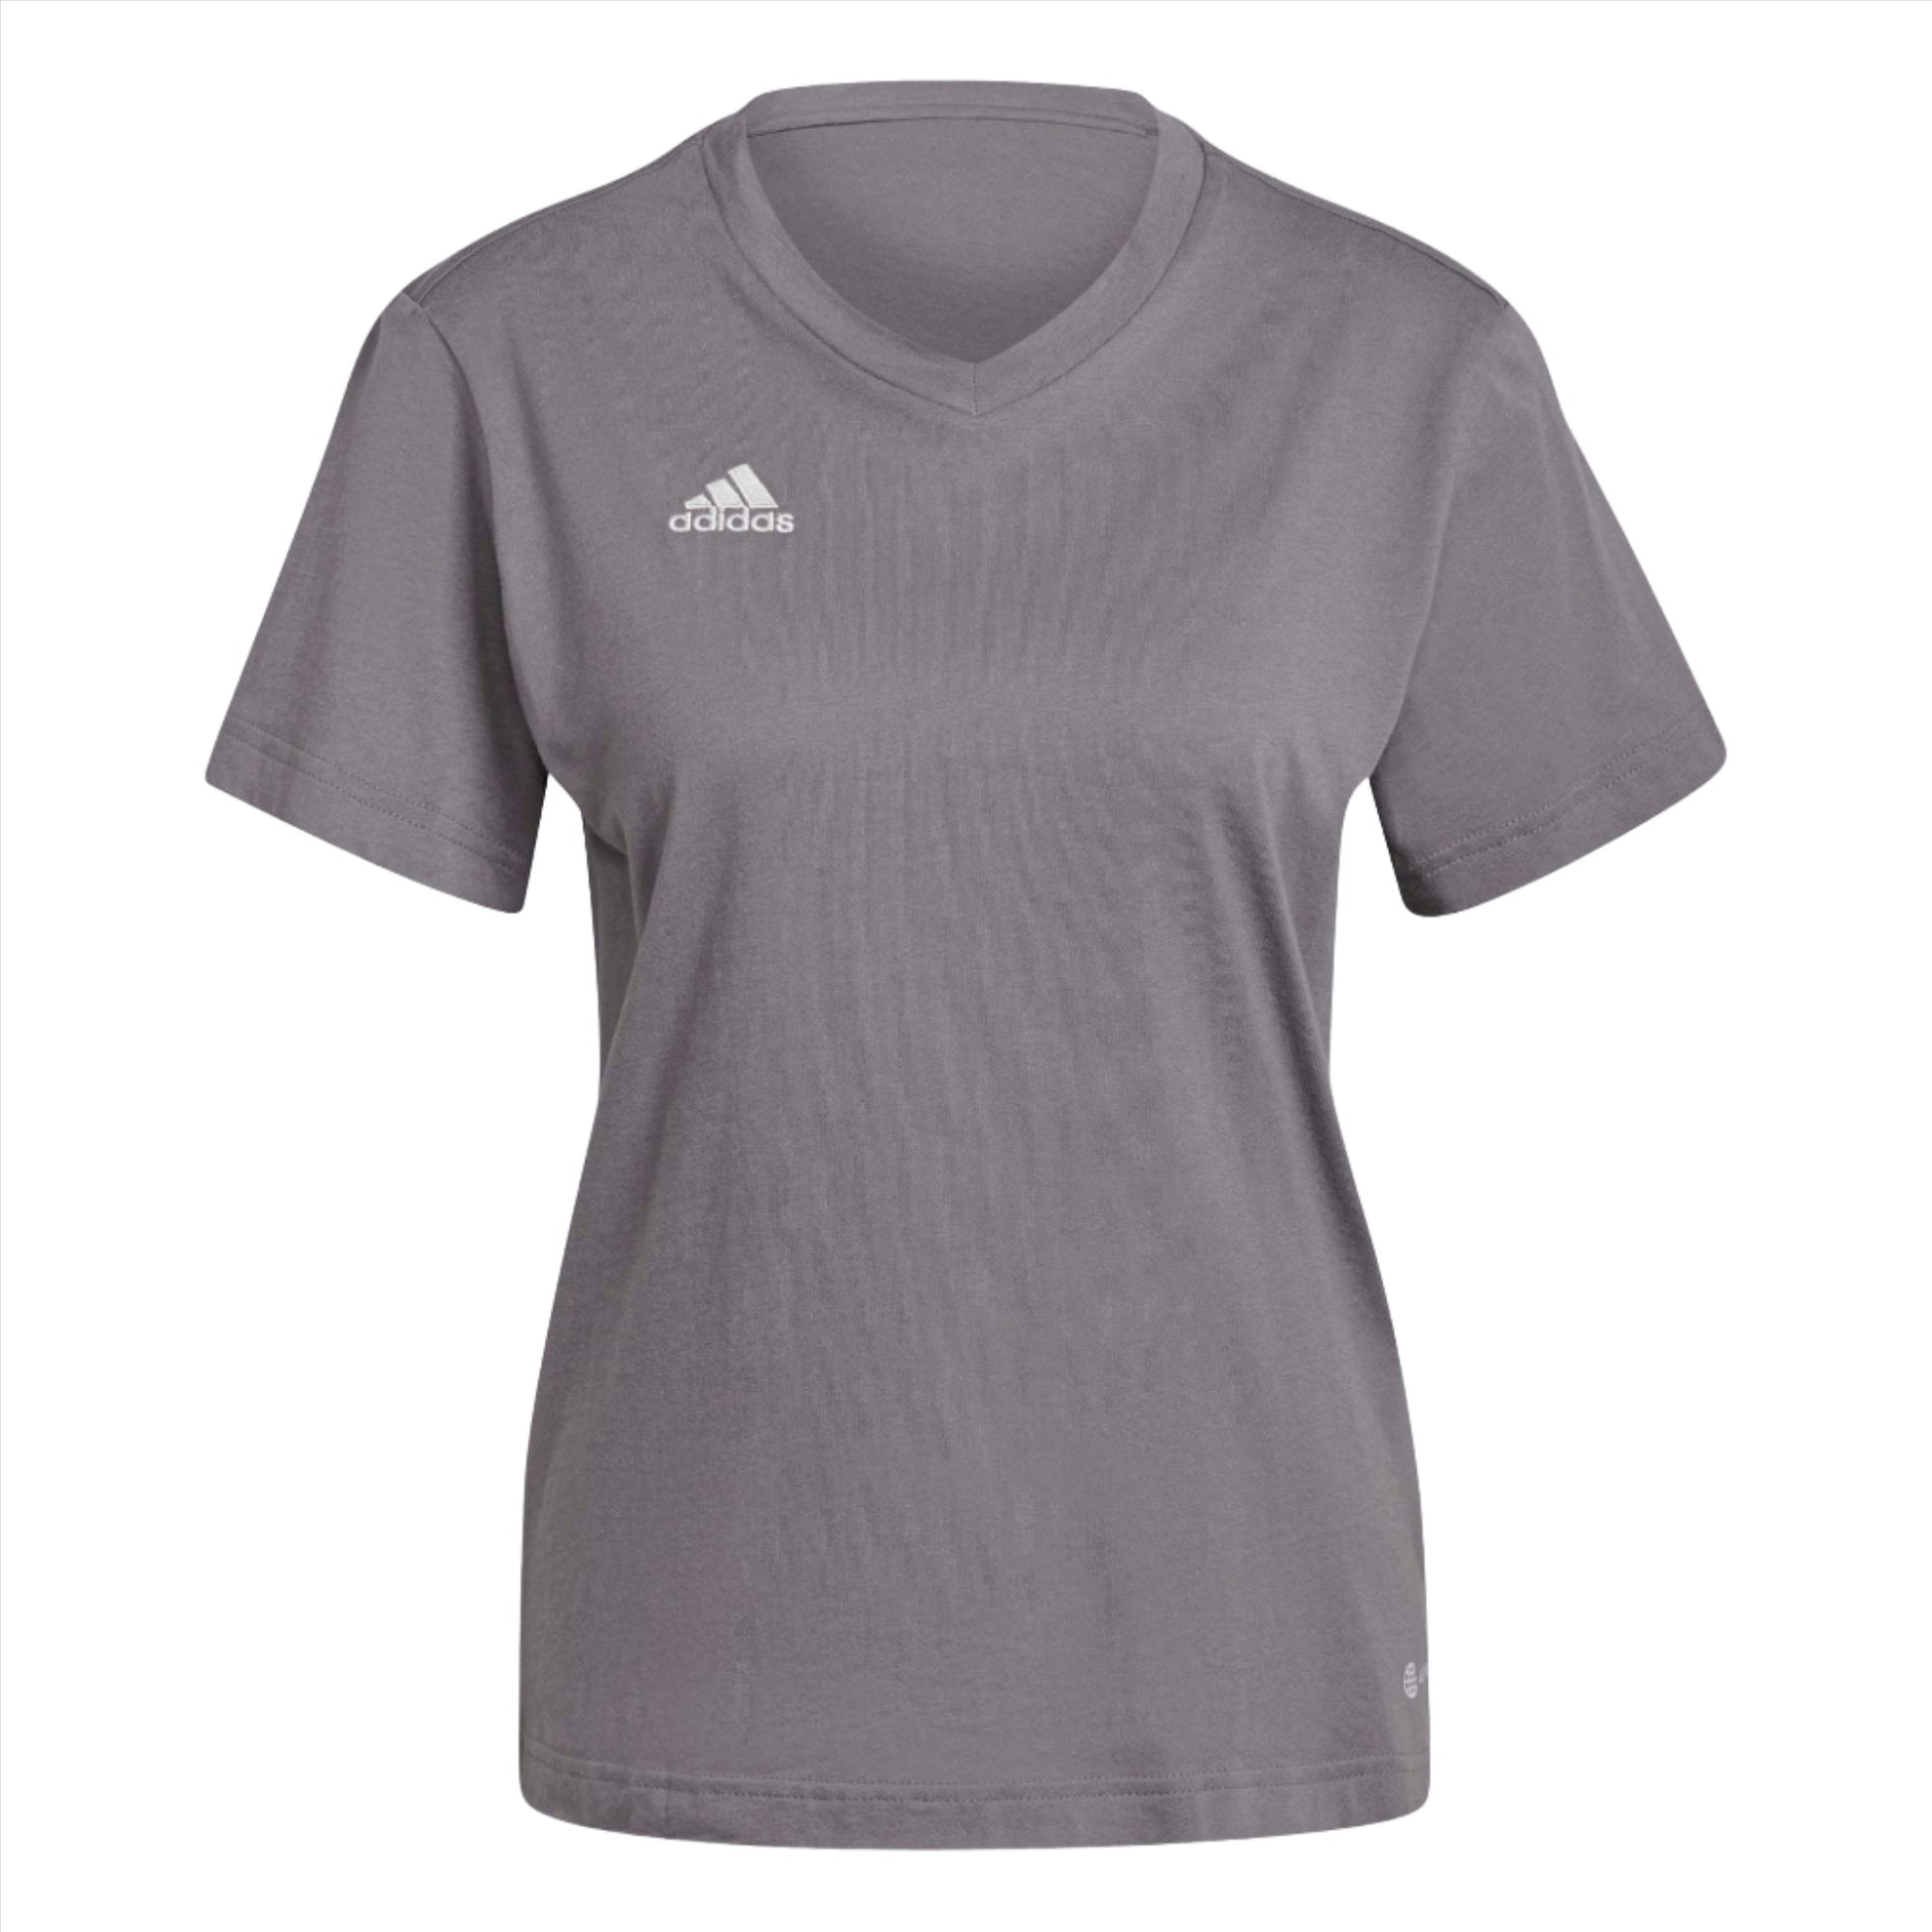 Entrada 22 Tee Ladies by Adidas - The Luxury Promotional Gifts Company Limited